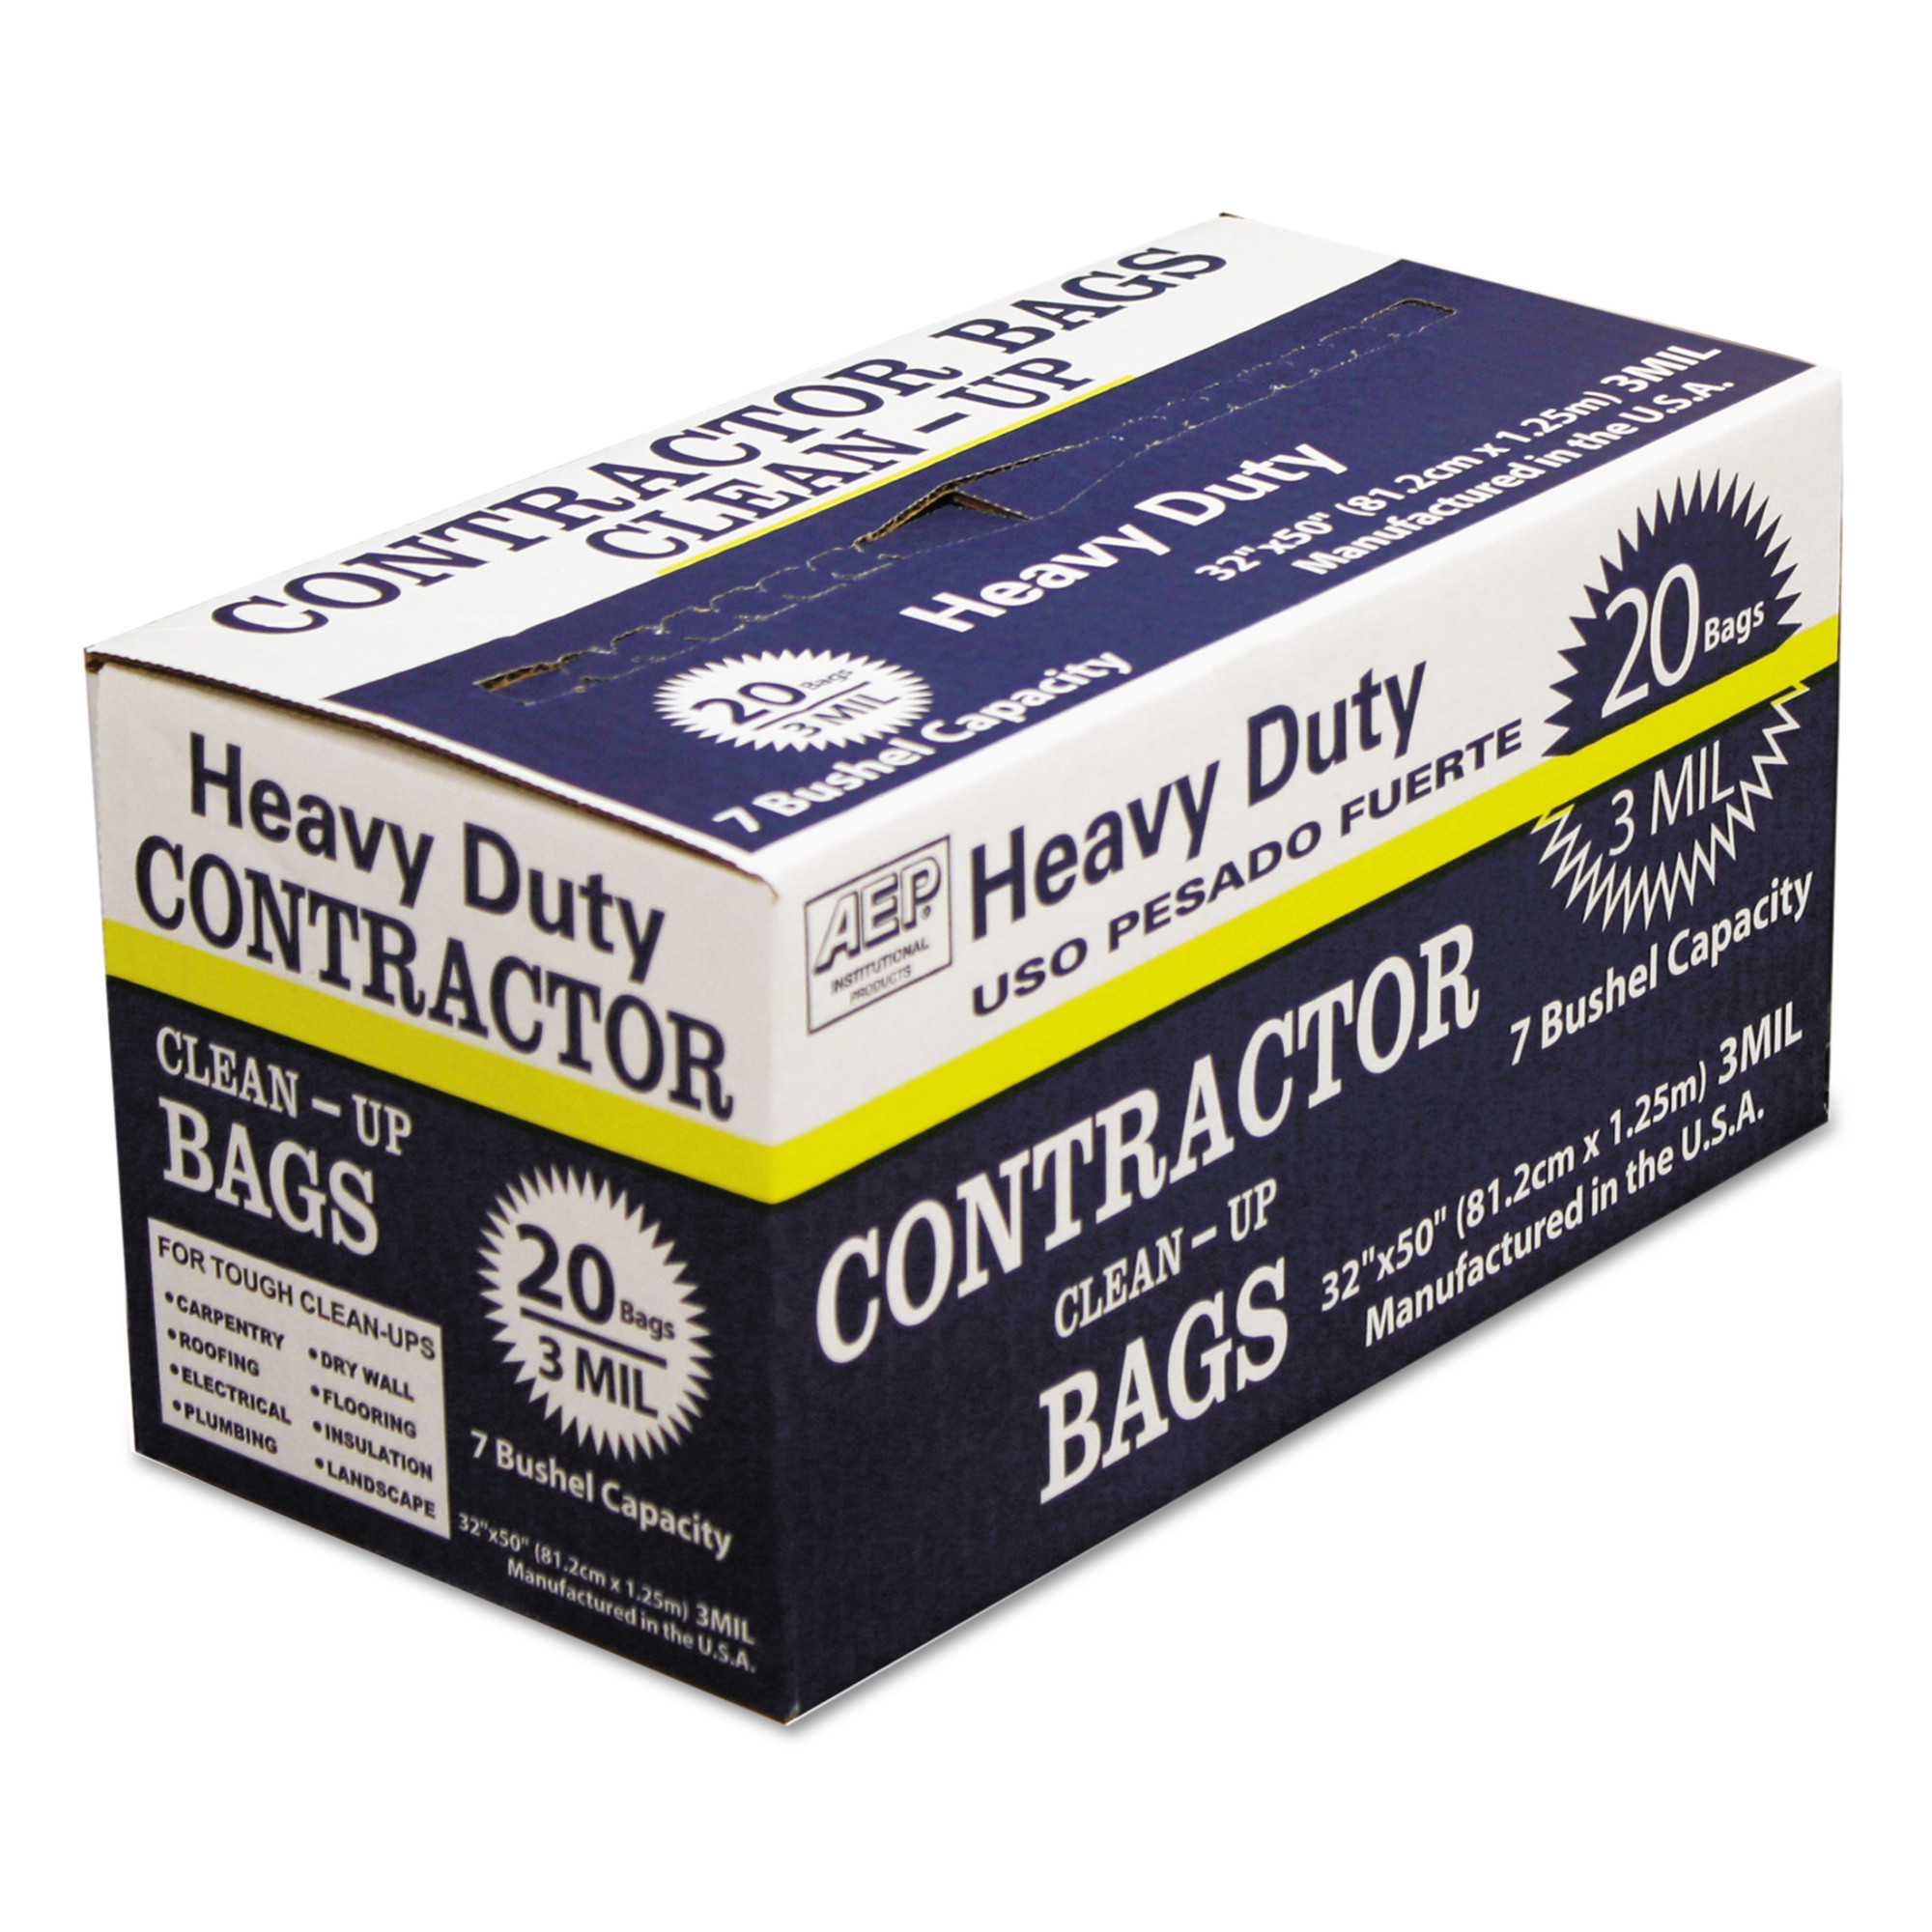 AEP Industries Inc. Heavy-Duty Contractor Clean-Up Bags, Product